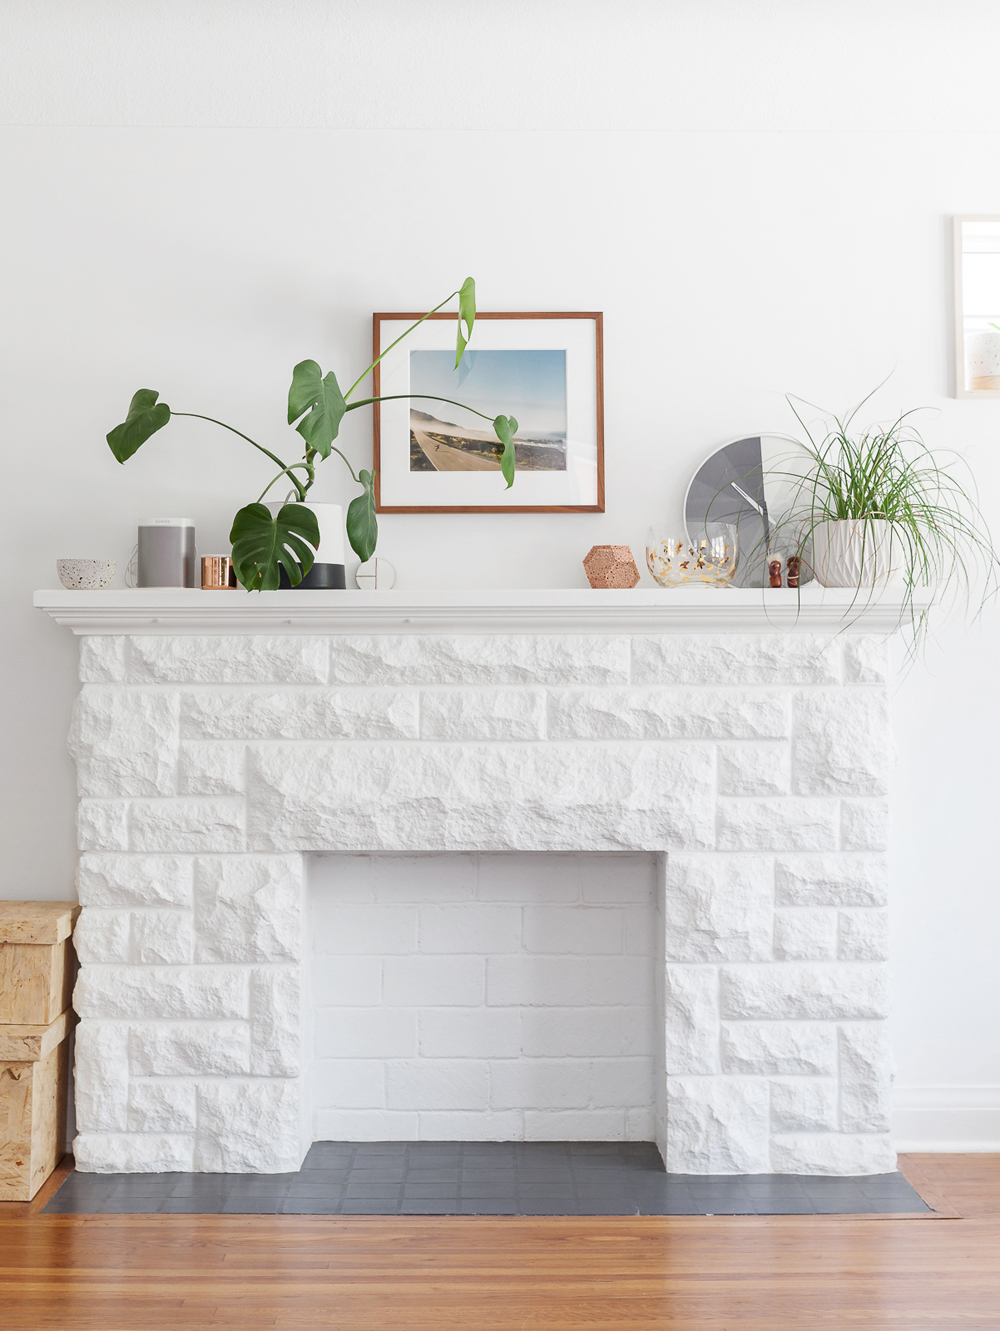 Close-up of the all-white fireplace in the living room with a framed photo hanging above